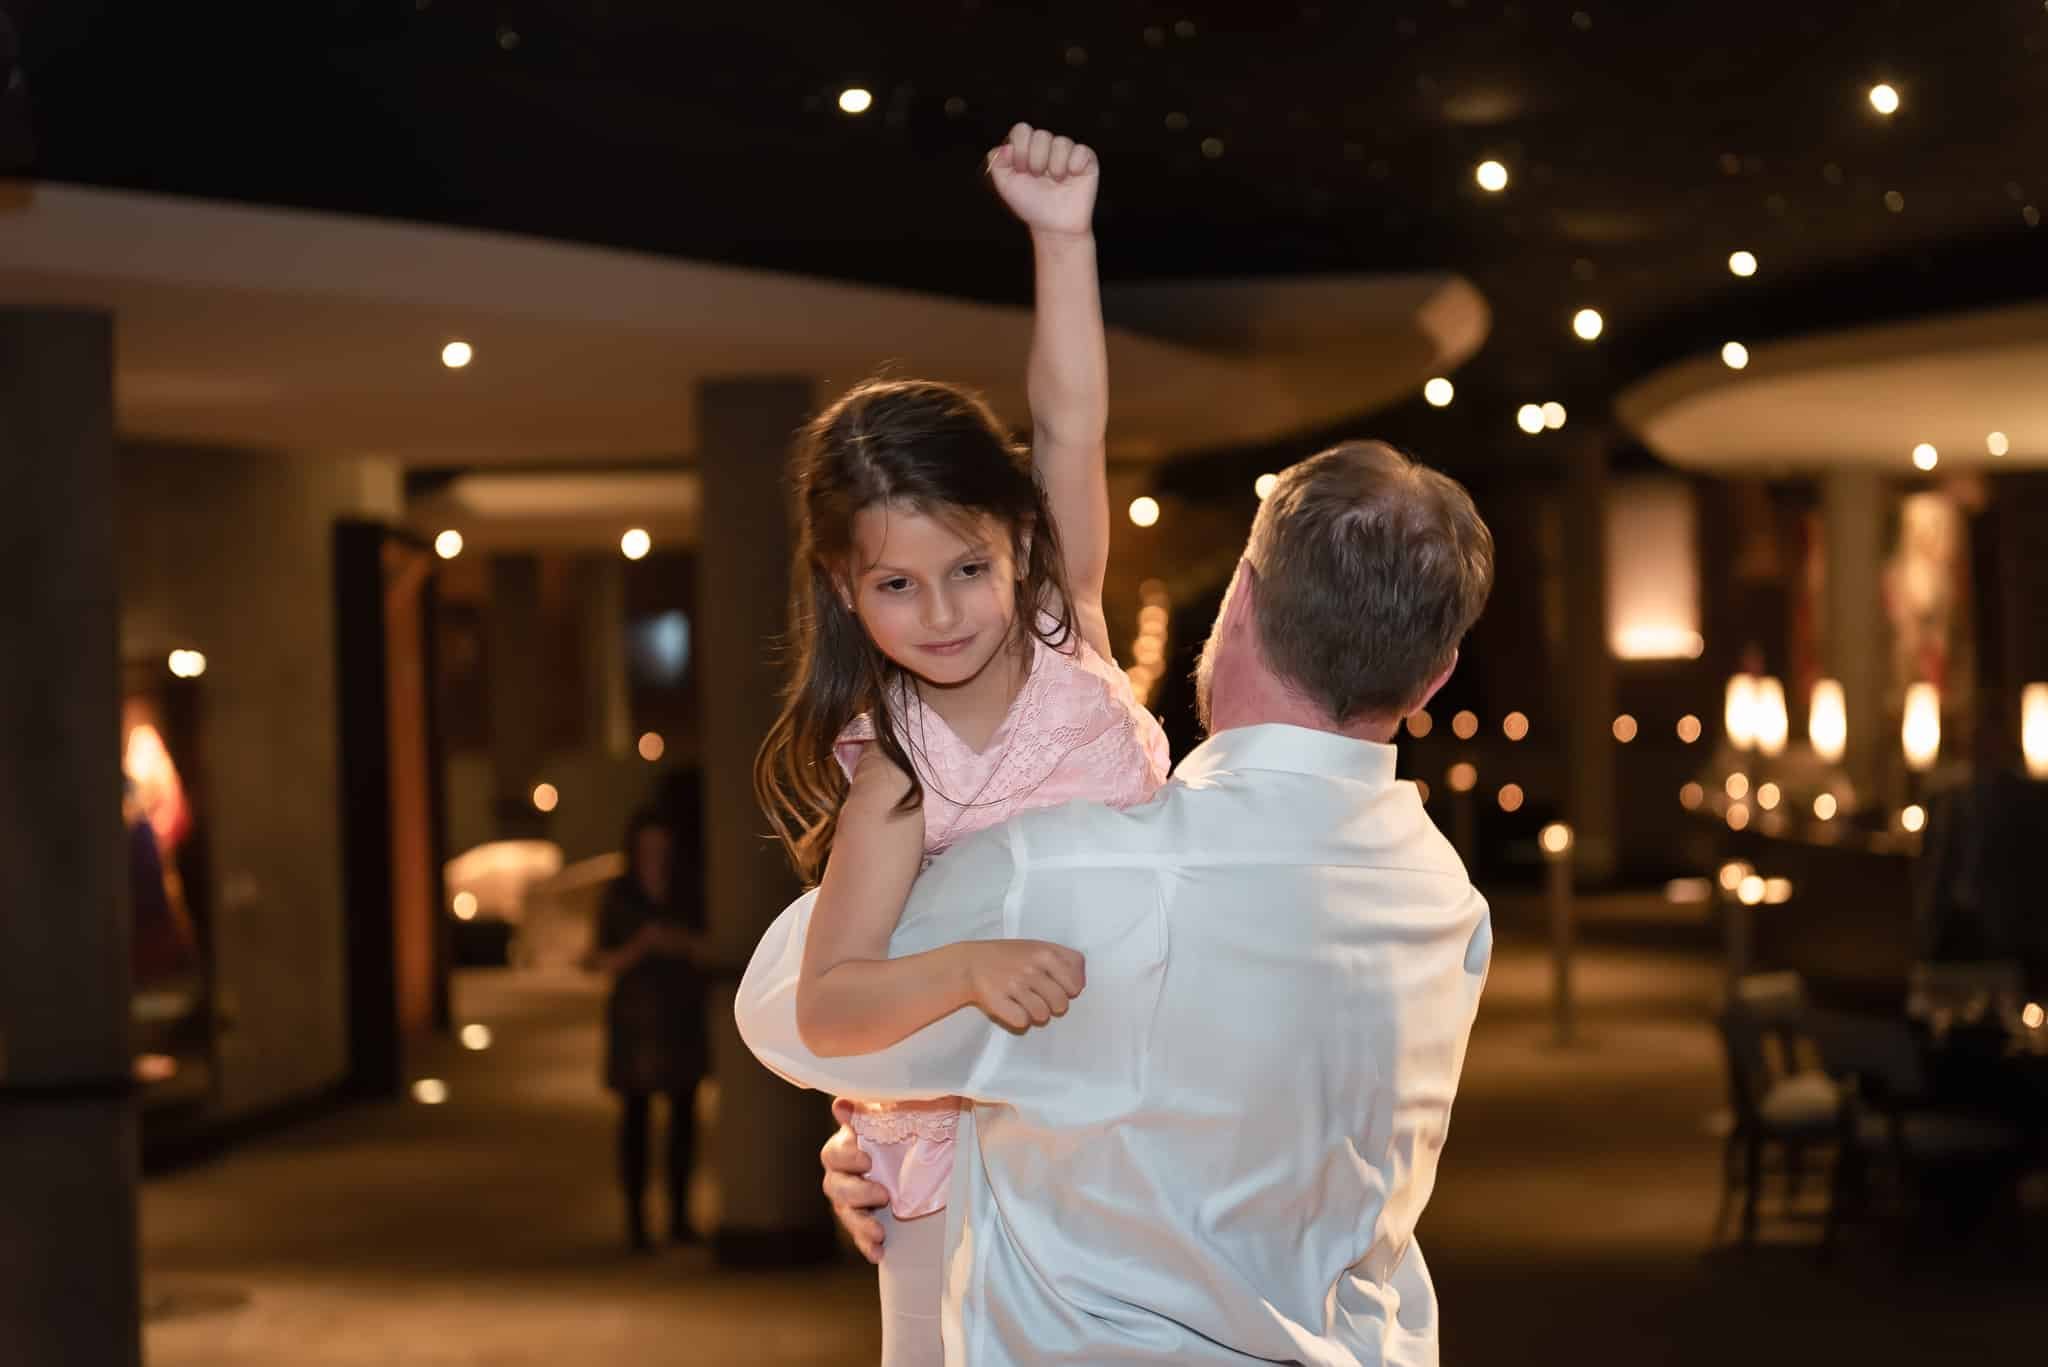 A young girl dances with her mother's husband during the wedding reception and raises her fist in victory.